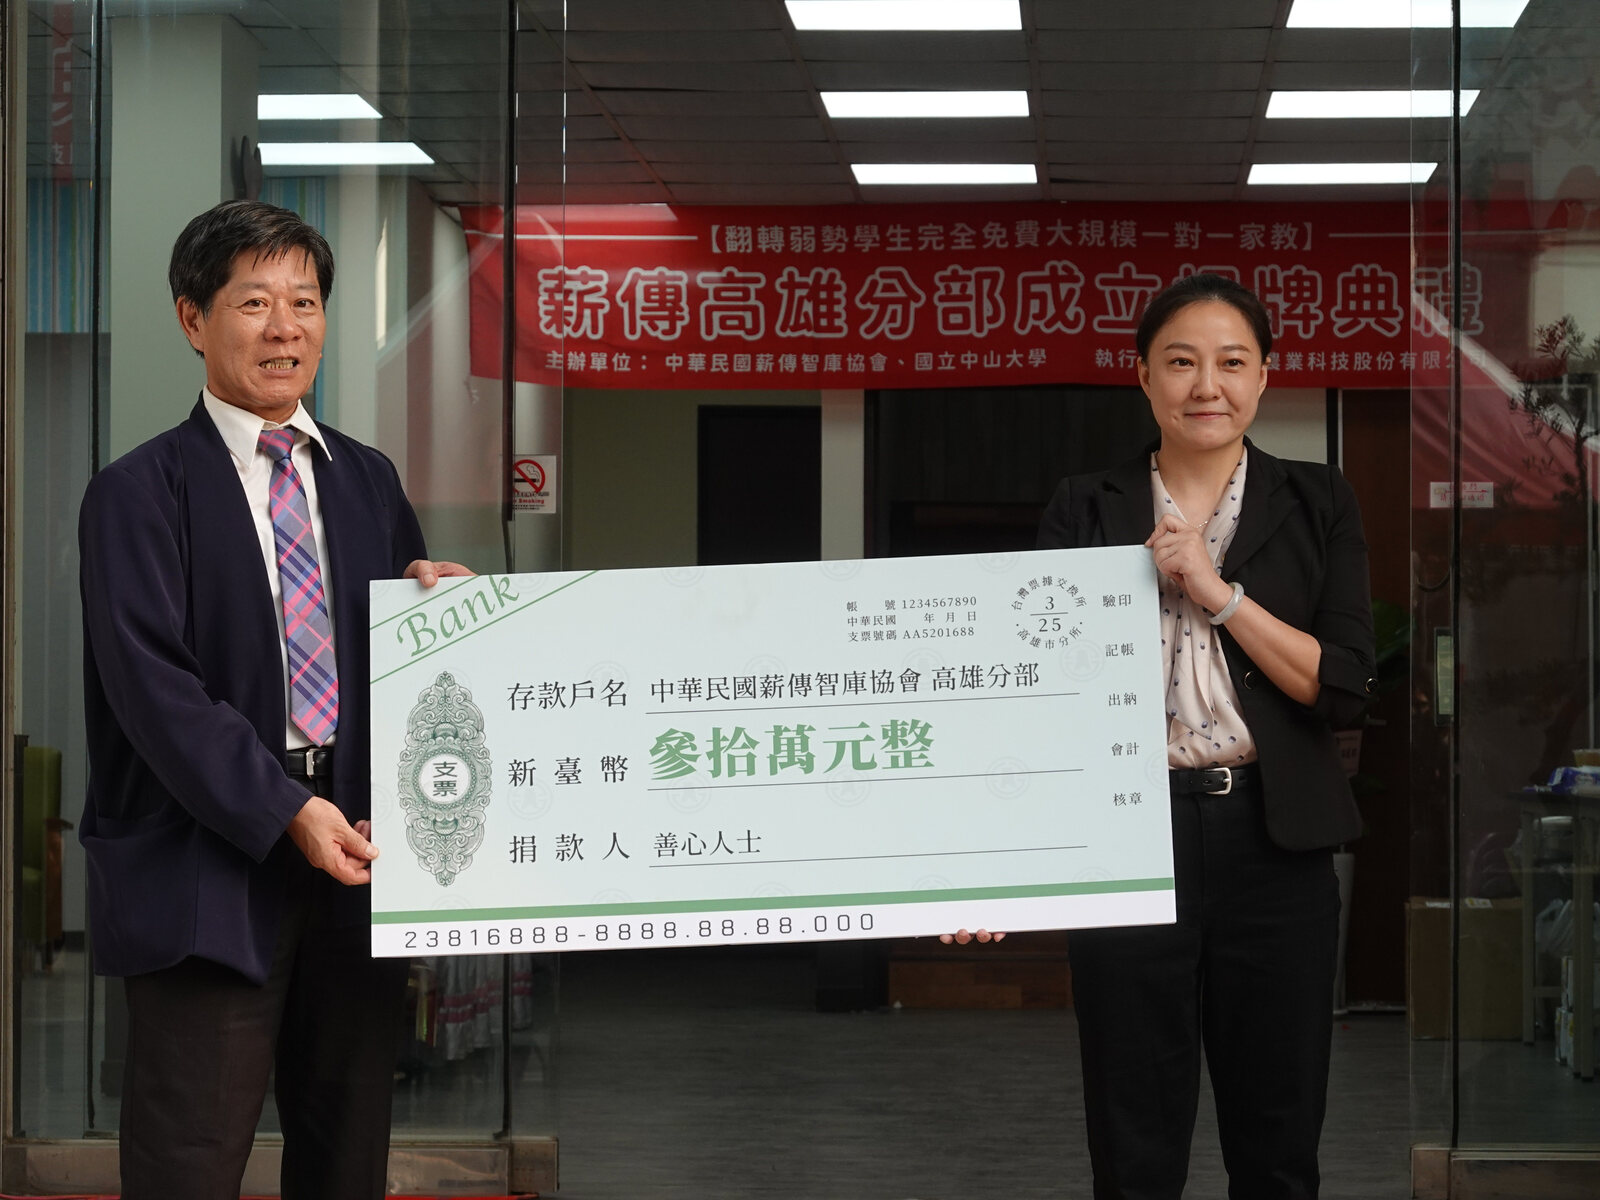 The donation presenting ceremony (From the left of the photo: Chin-Shan Huang, the curator of Hsing Chain Think Tank Association, and Hsin-Yu Hu, CEO of ChienHsing Agriculture Technology Co., Ltd.)